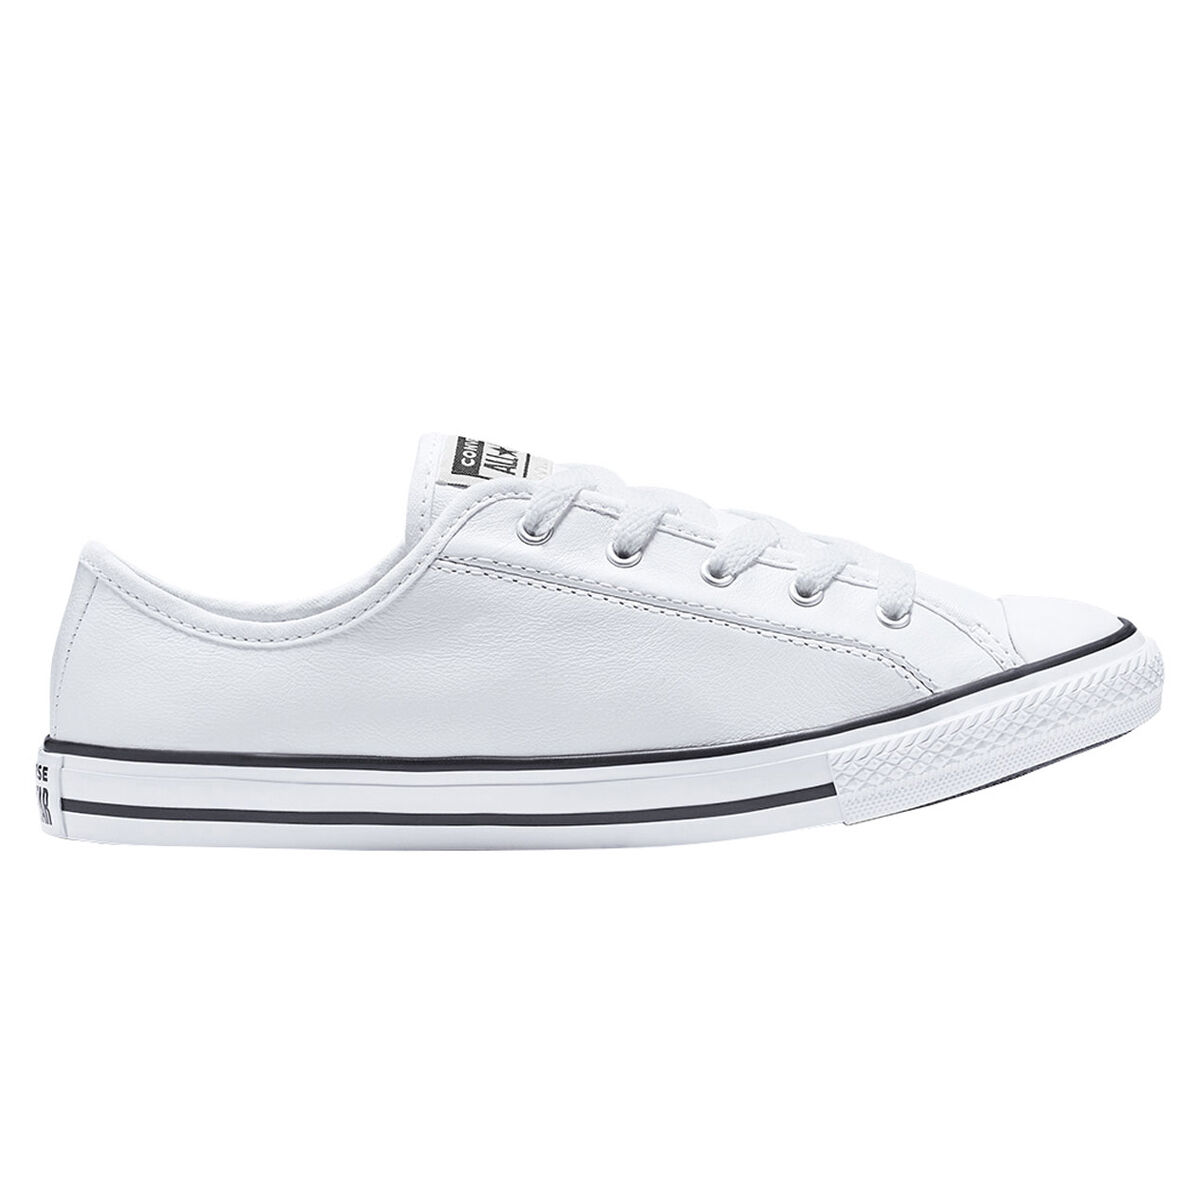 converse dainty shoes